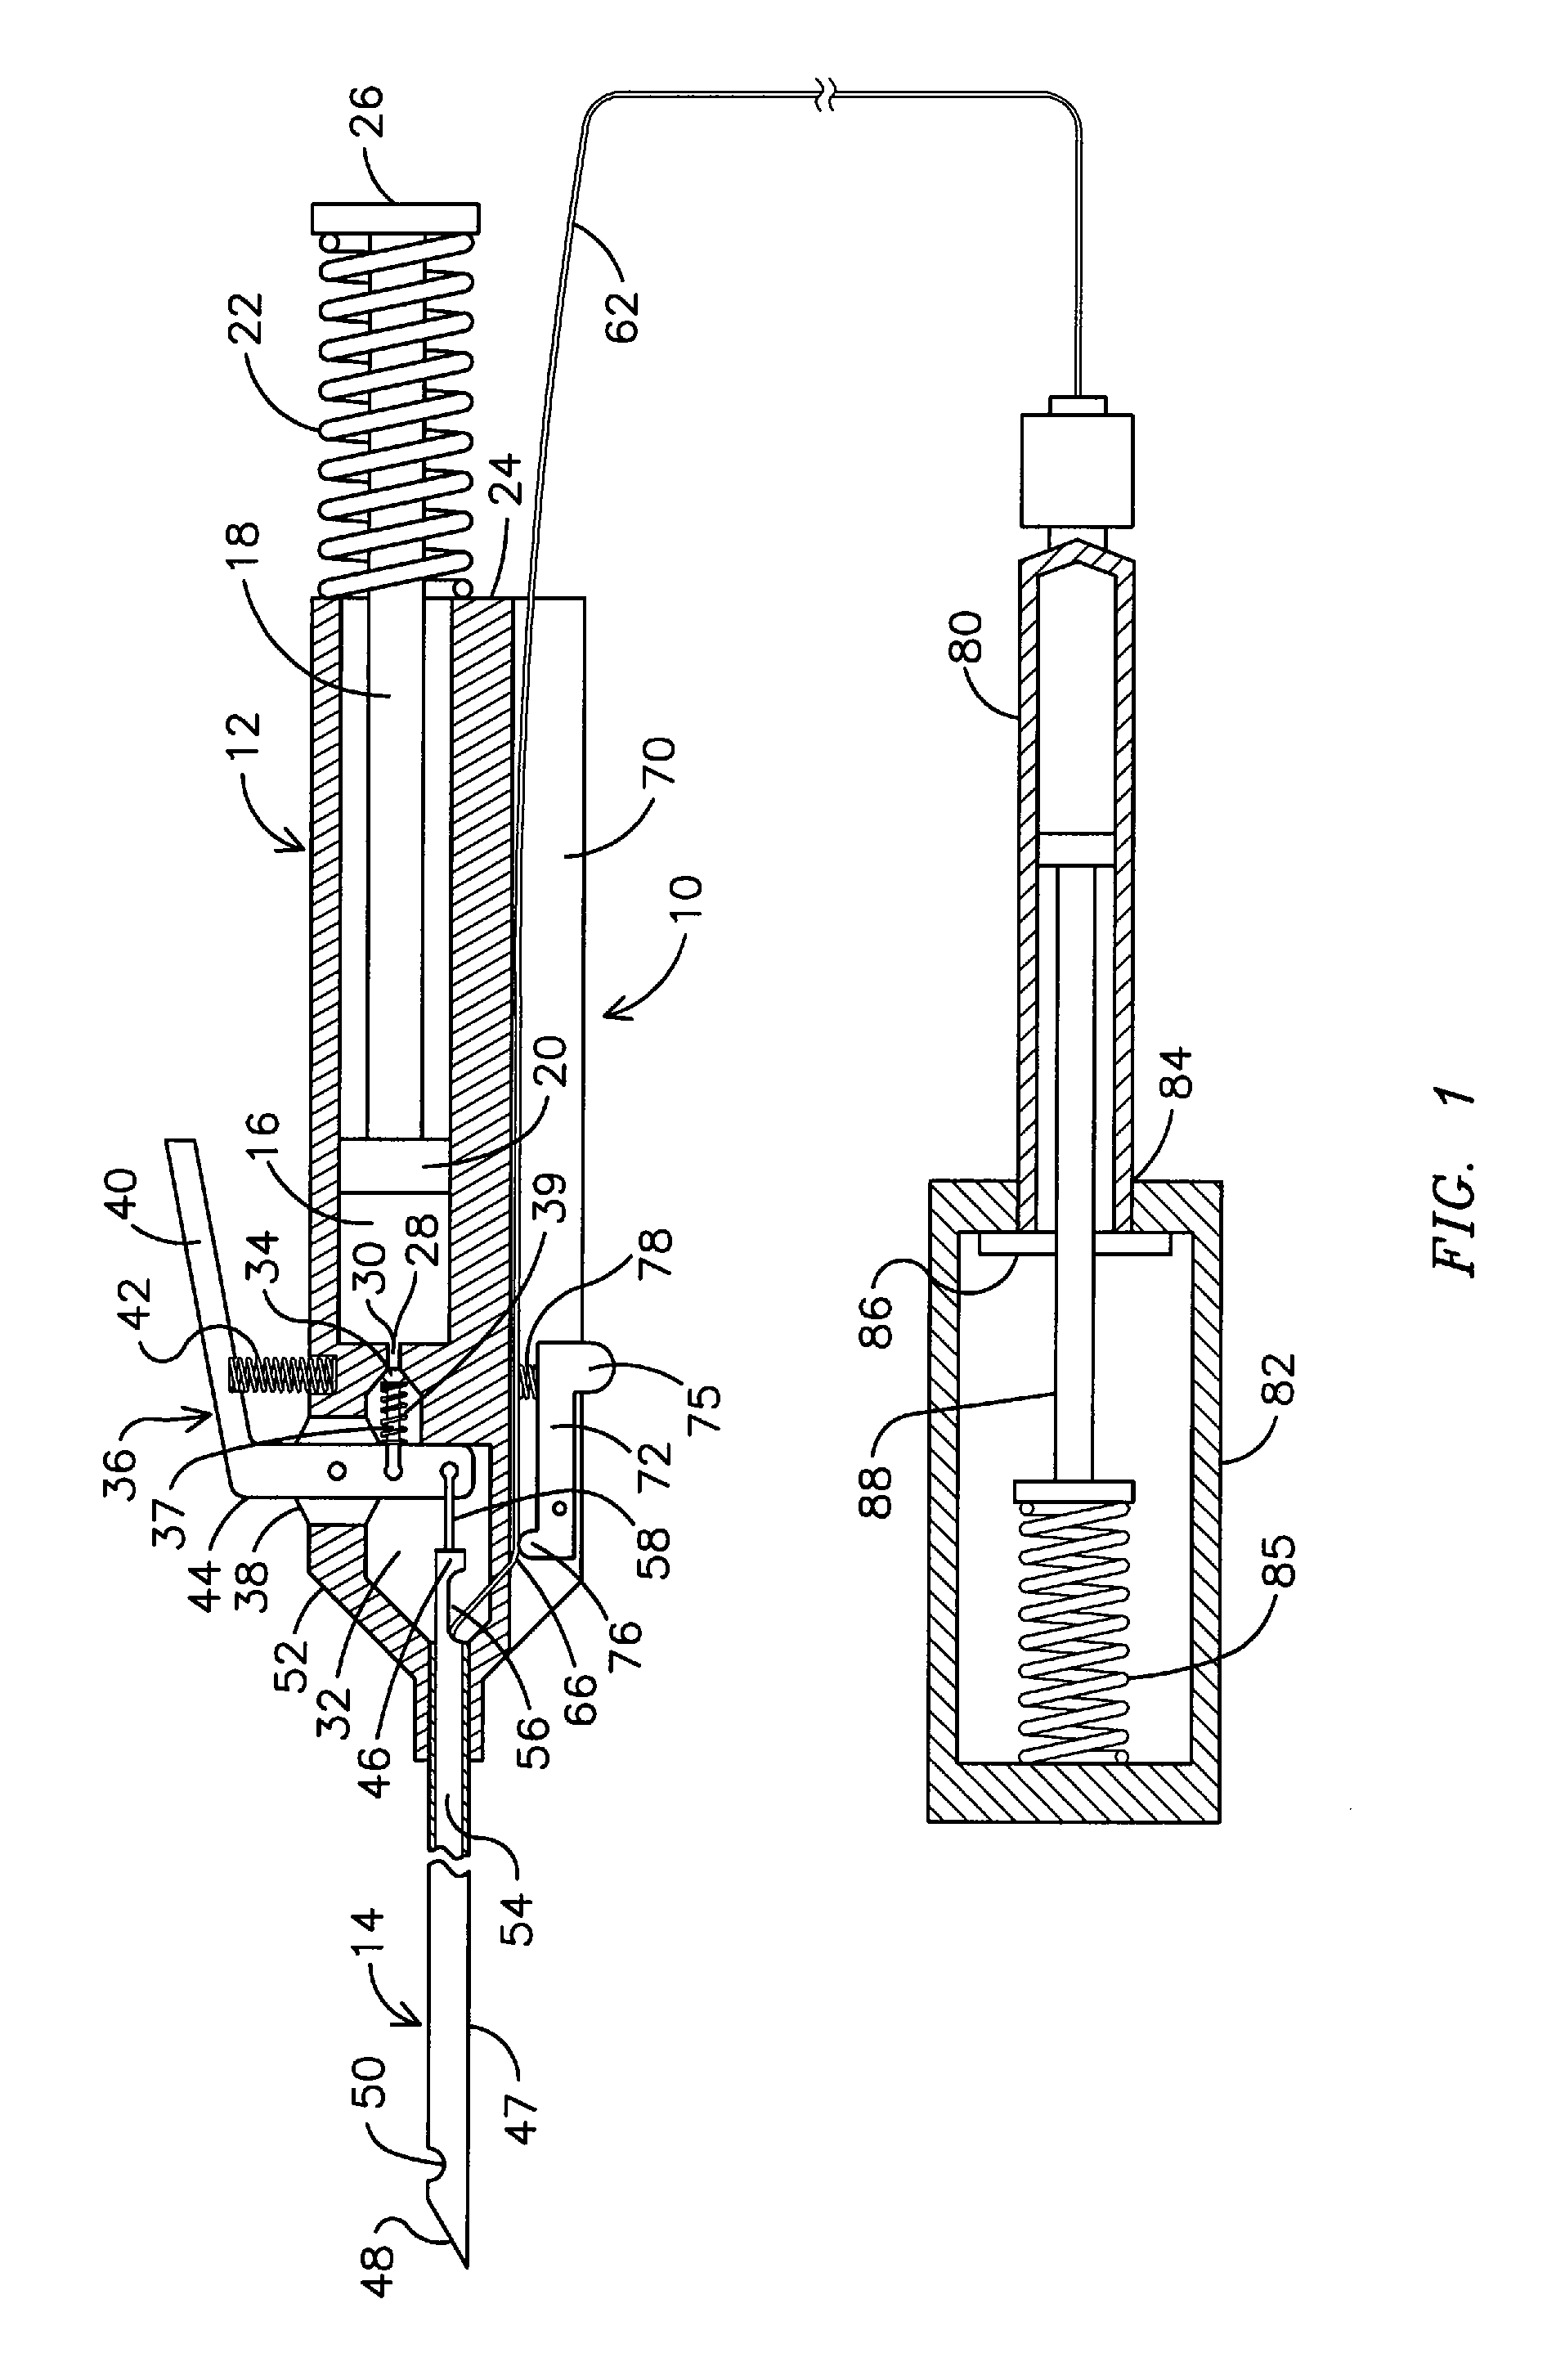 Tool for extracting vitreous samples from an eye